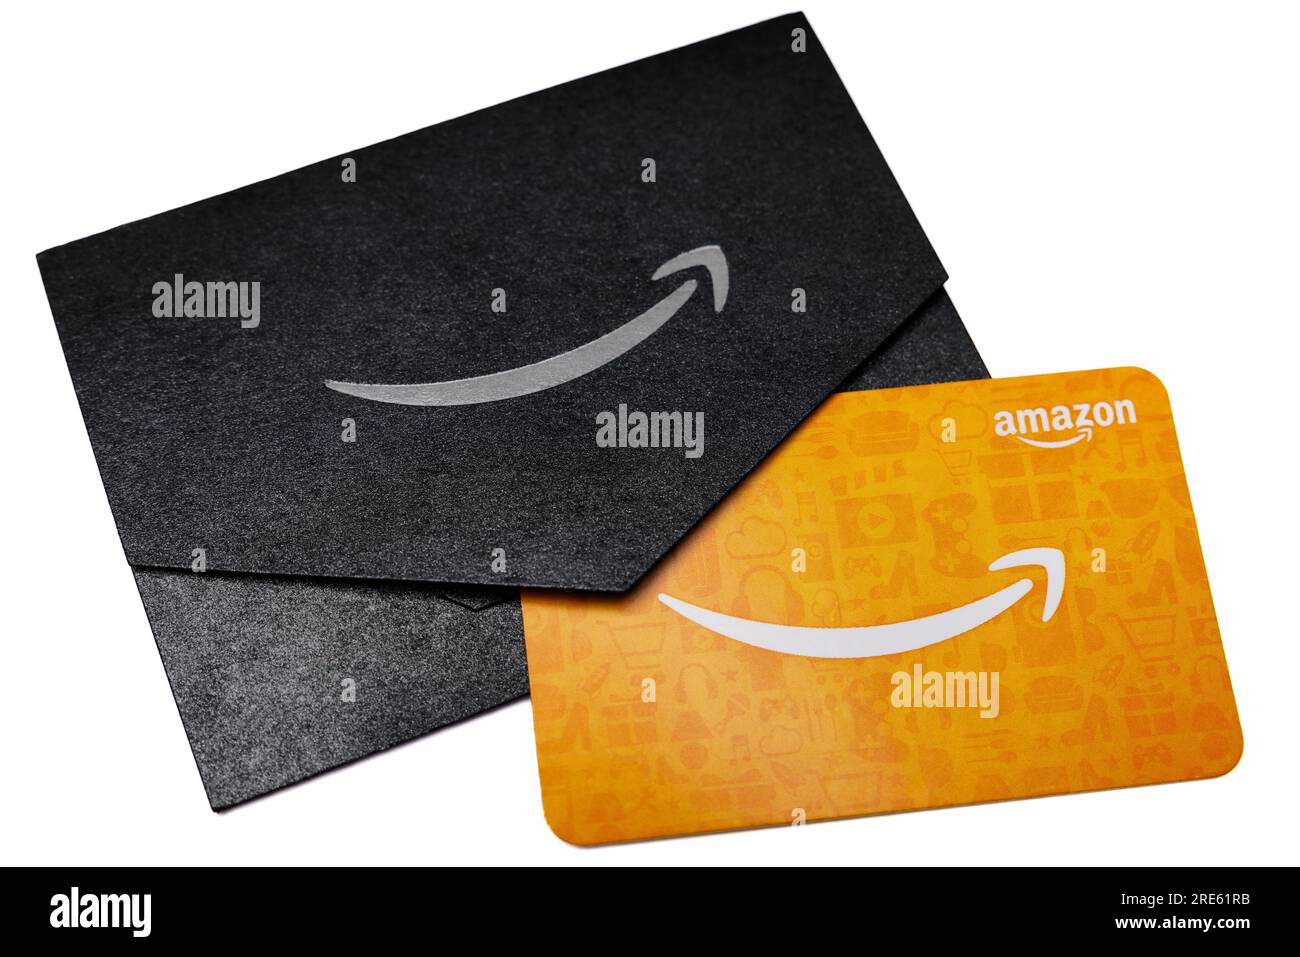 ATLANTA, GEORGIA - JULY 25, 2023 : Amazon gift cards can be used to purchase items from the Amazon.com website via computer or mobile device. Stock Photo